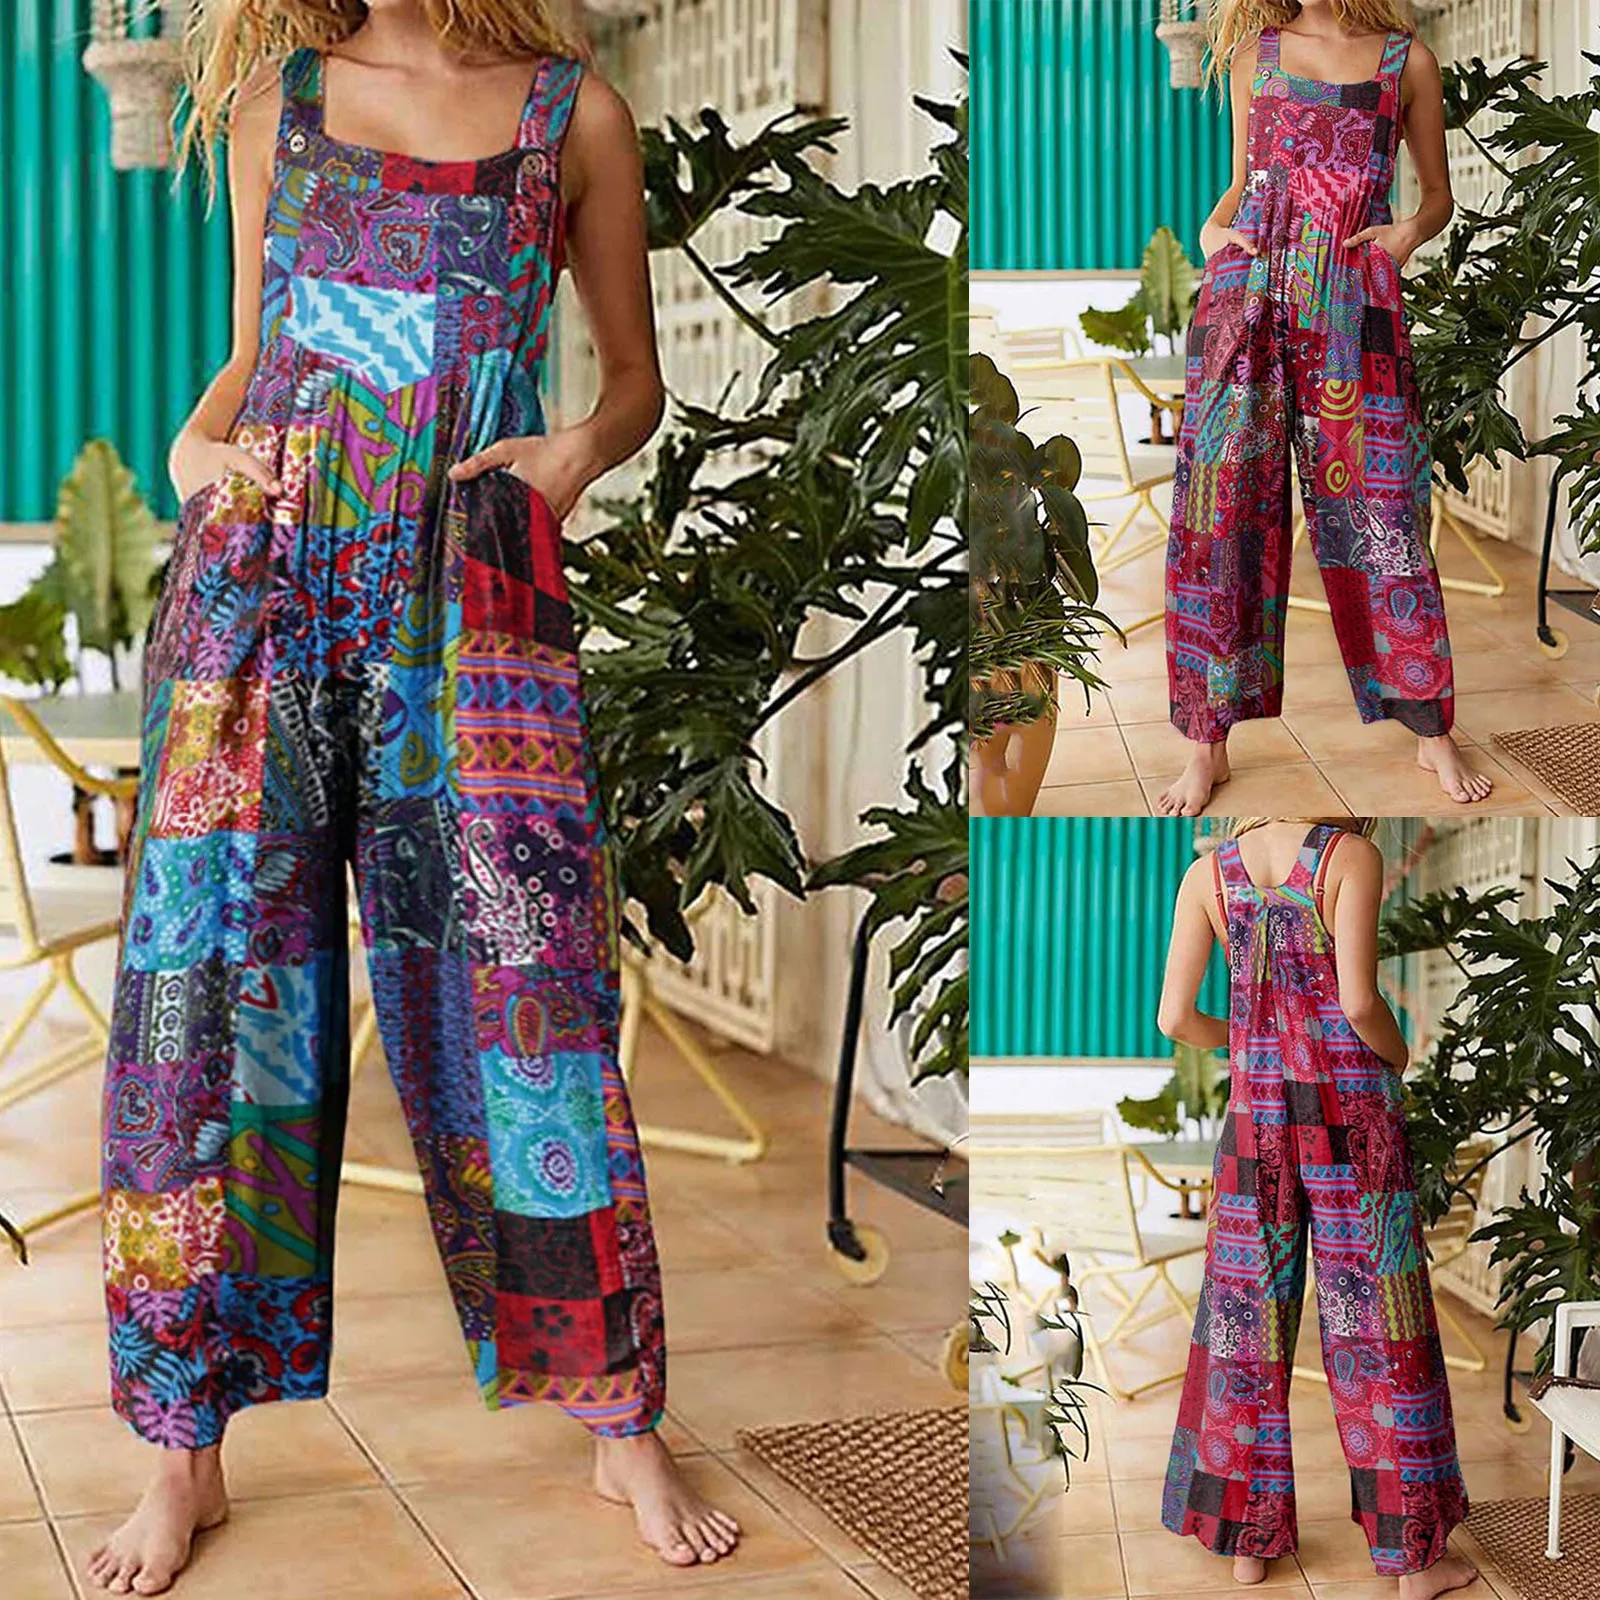 Women Jumpsuits Summer Overalls Multicolor Ethnic Style Square Neck Sleeveless Casual Rompers with Pockets for Girls Playsuit